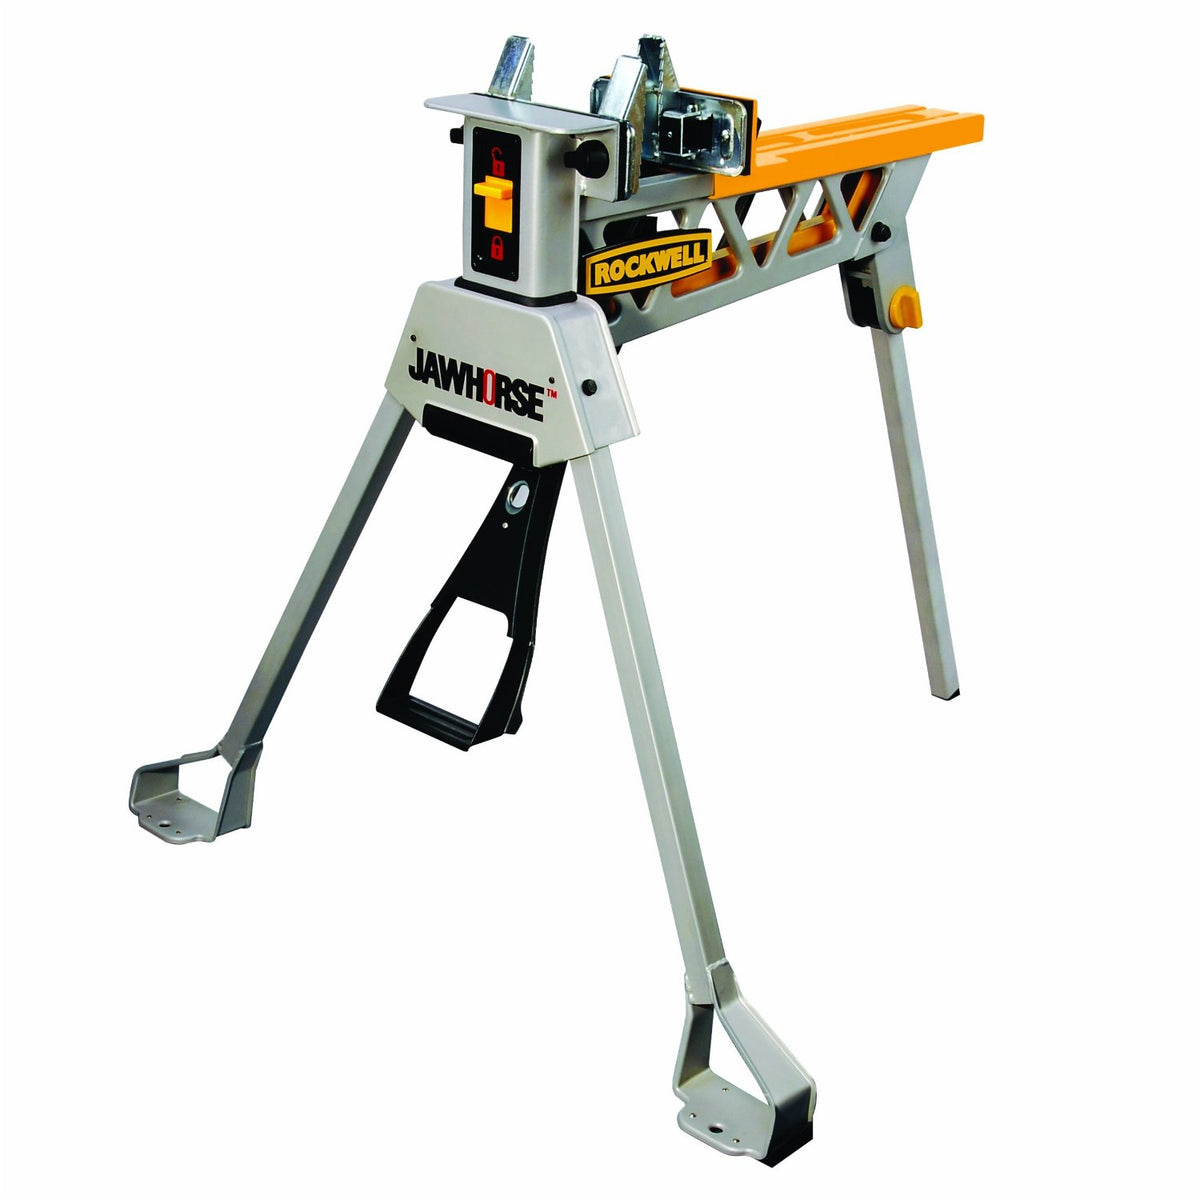 Buy rockwell rk9109 - Online store for clamps & soldering tools, sawhorses & brackets in USA, on sale, low price, discount deals, coupon code